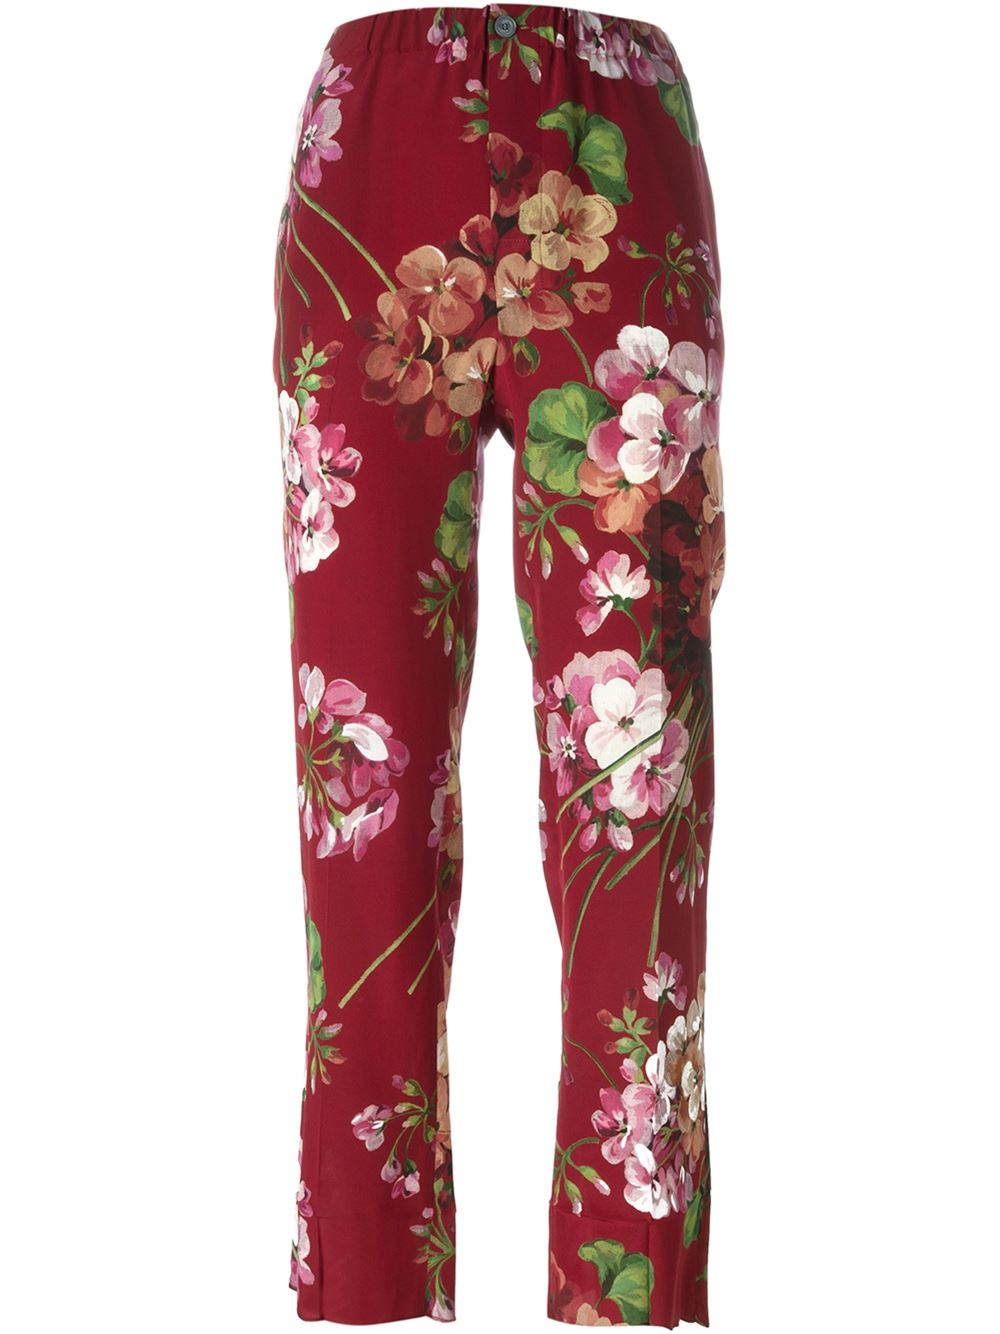 Gucci Silk Trousers With Bloom Print in Red for Men - Lyst